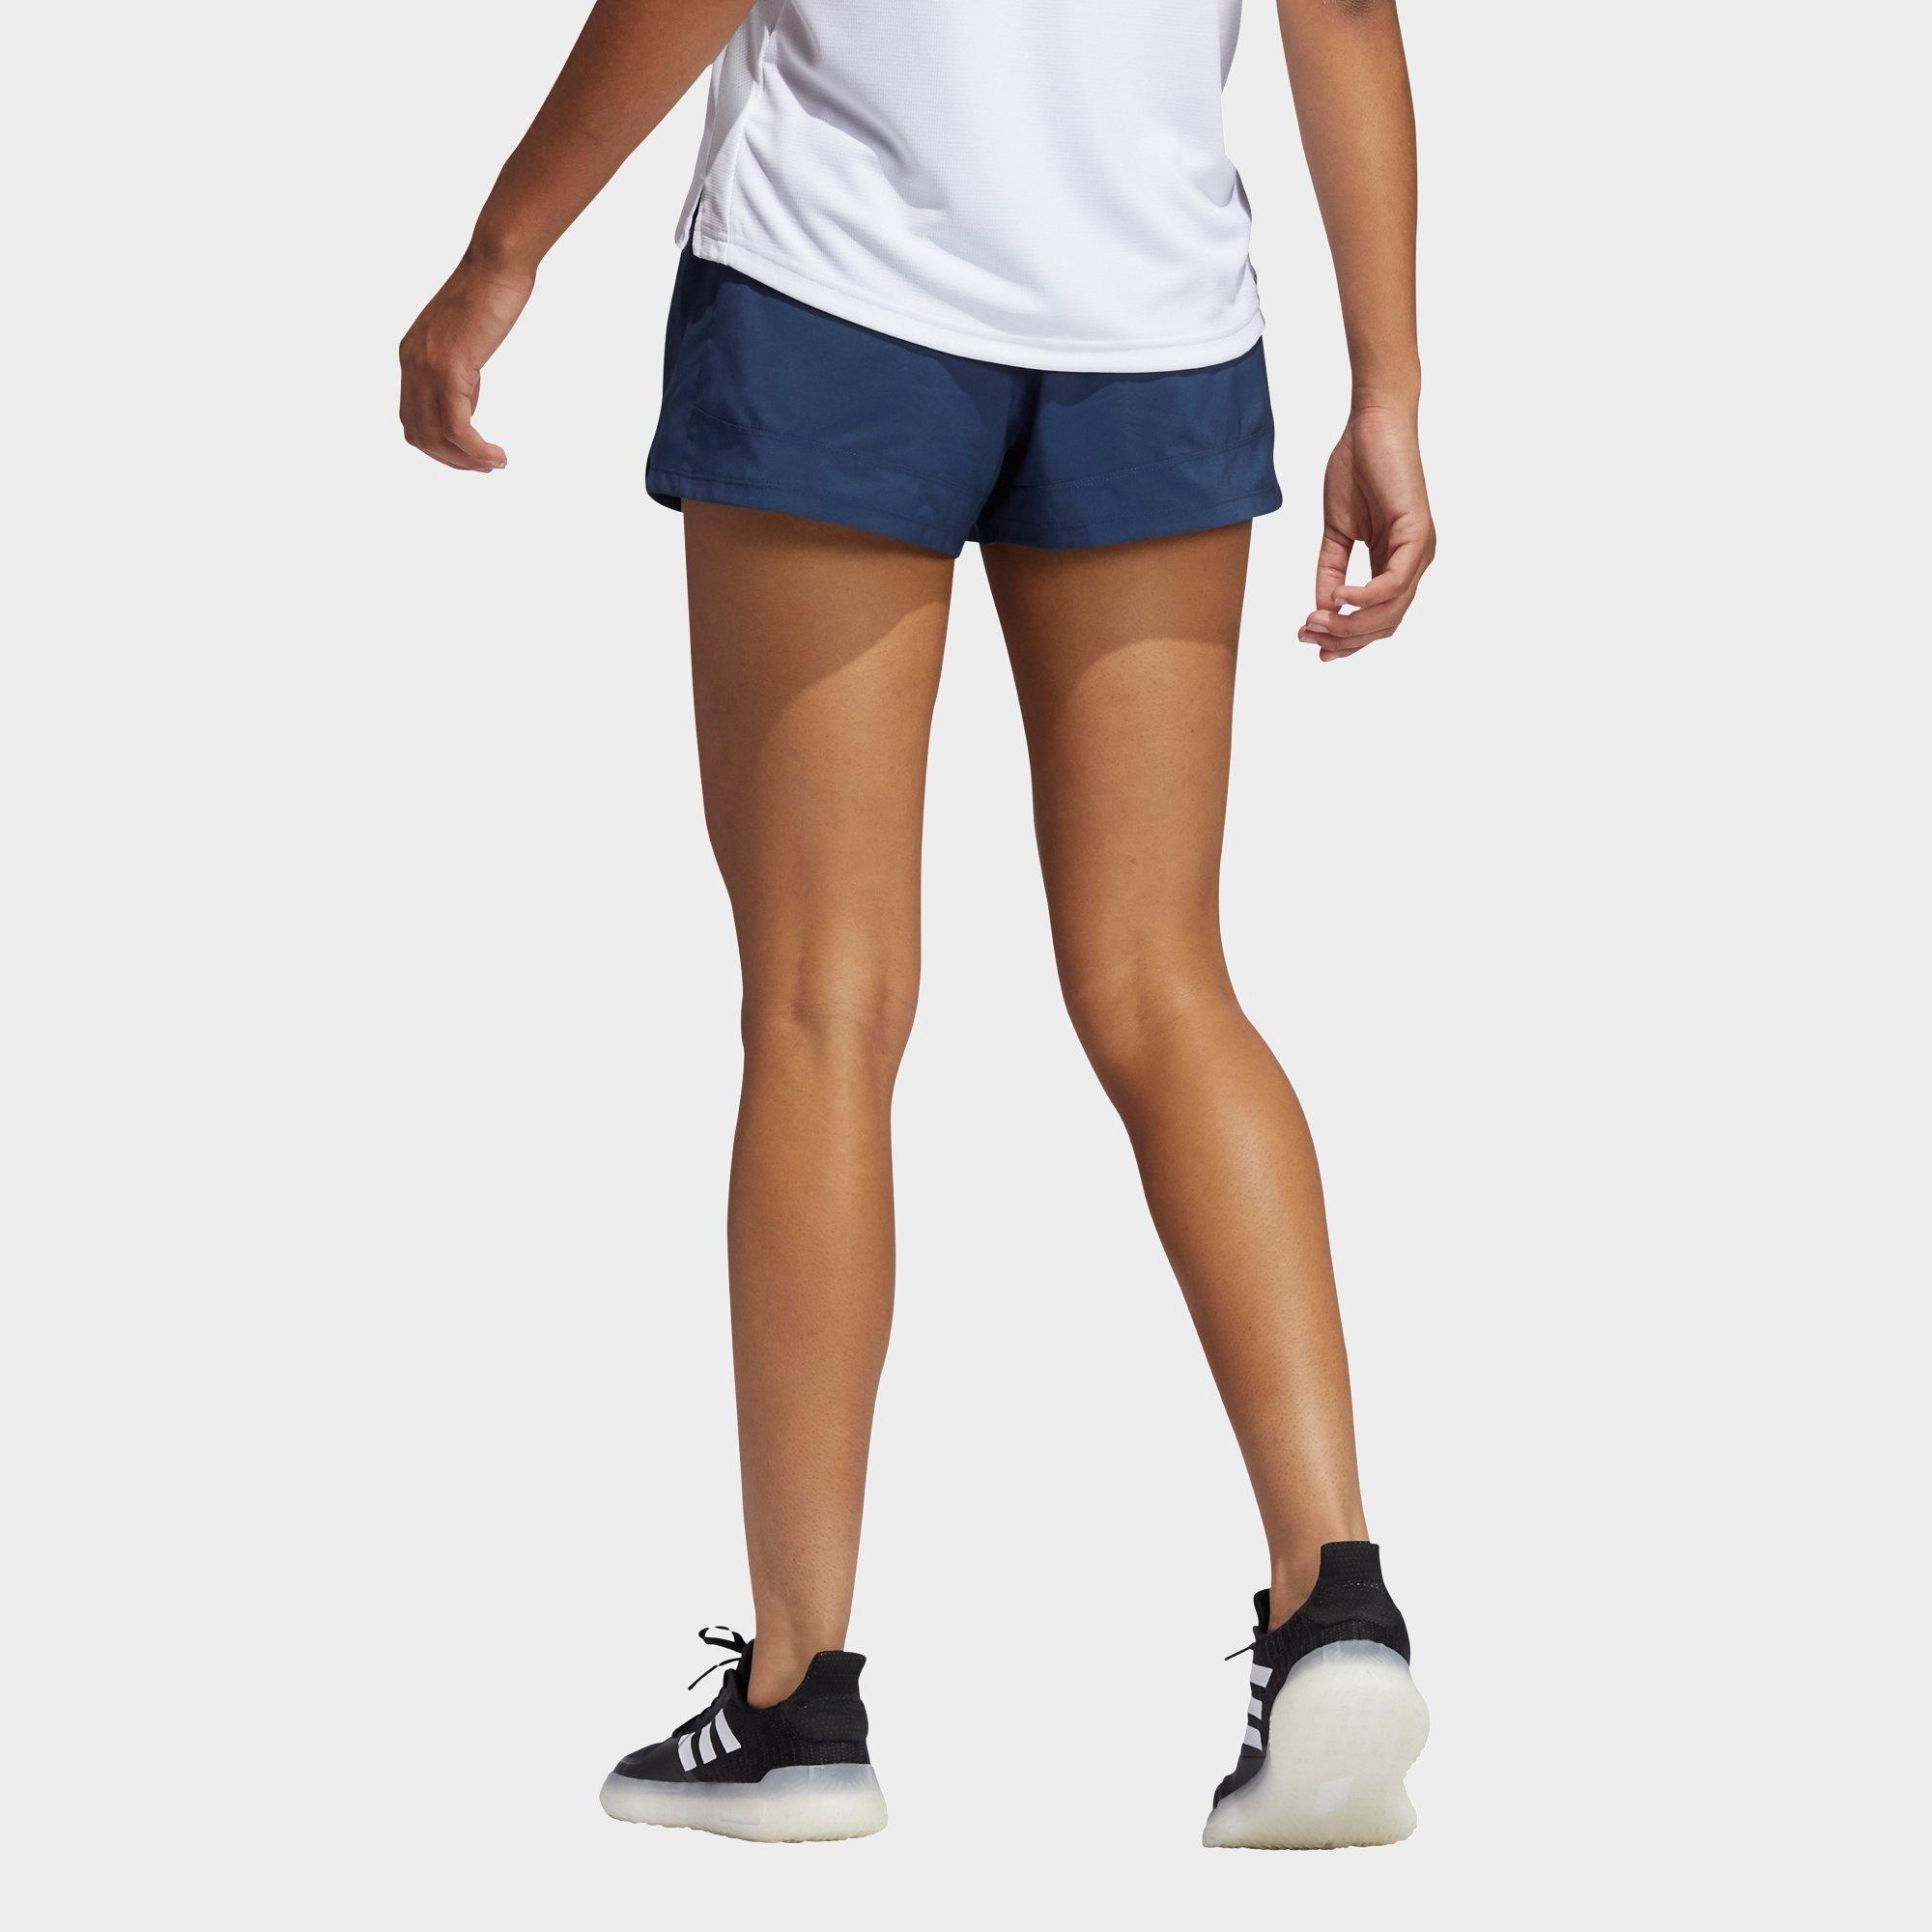 adidas women's badge of sport print pacer shorts